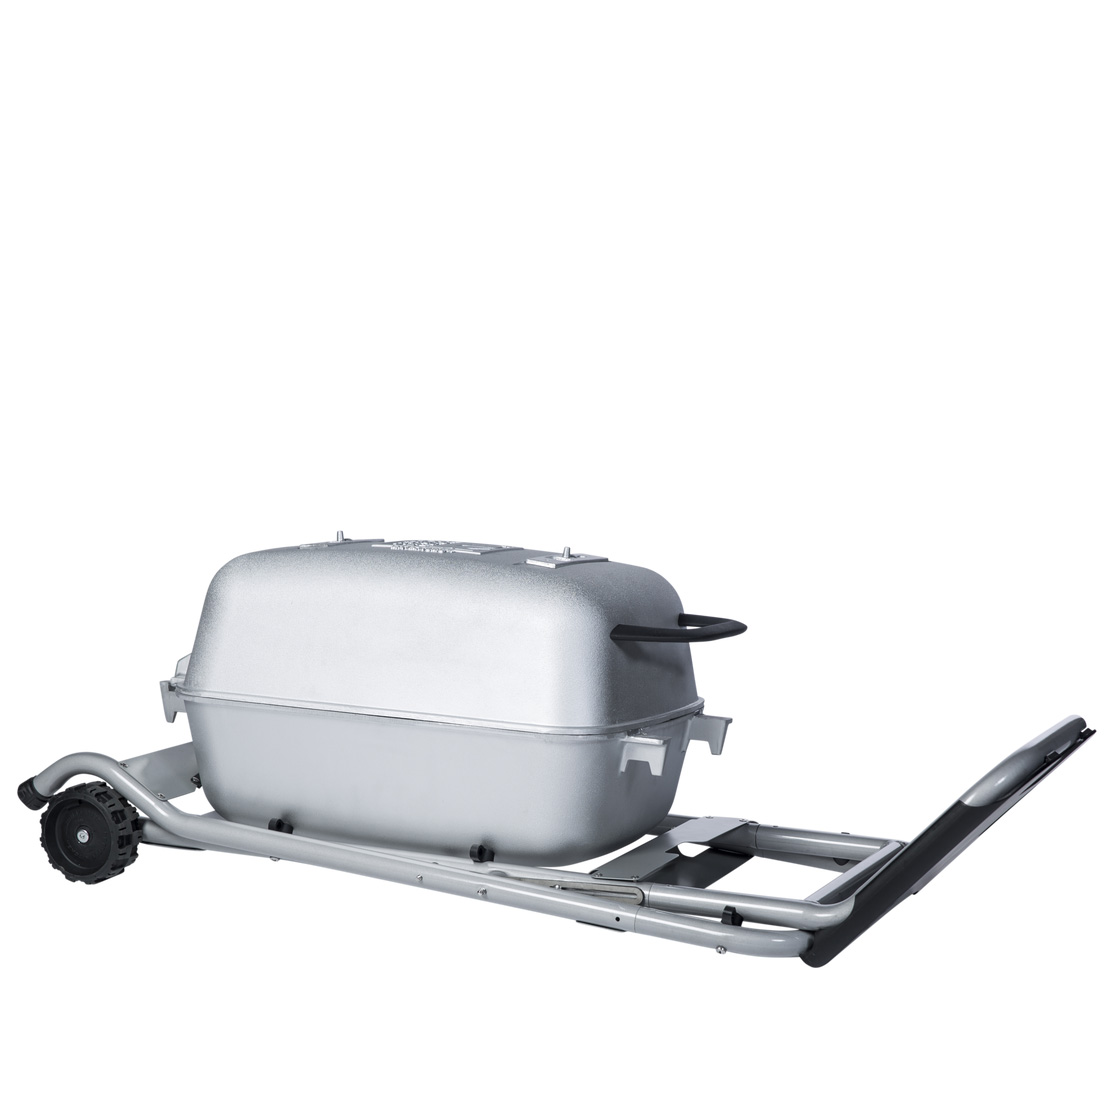 PKTX-Original-Silver-Grill-14-Cart-Folded.png